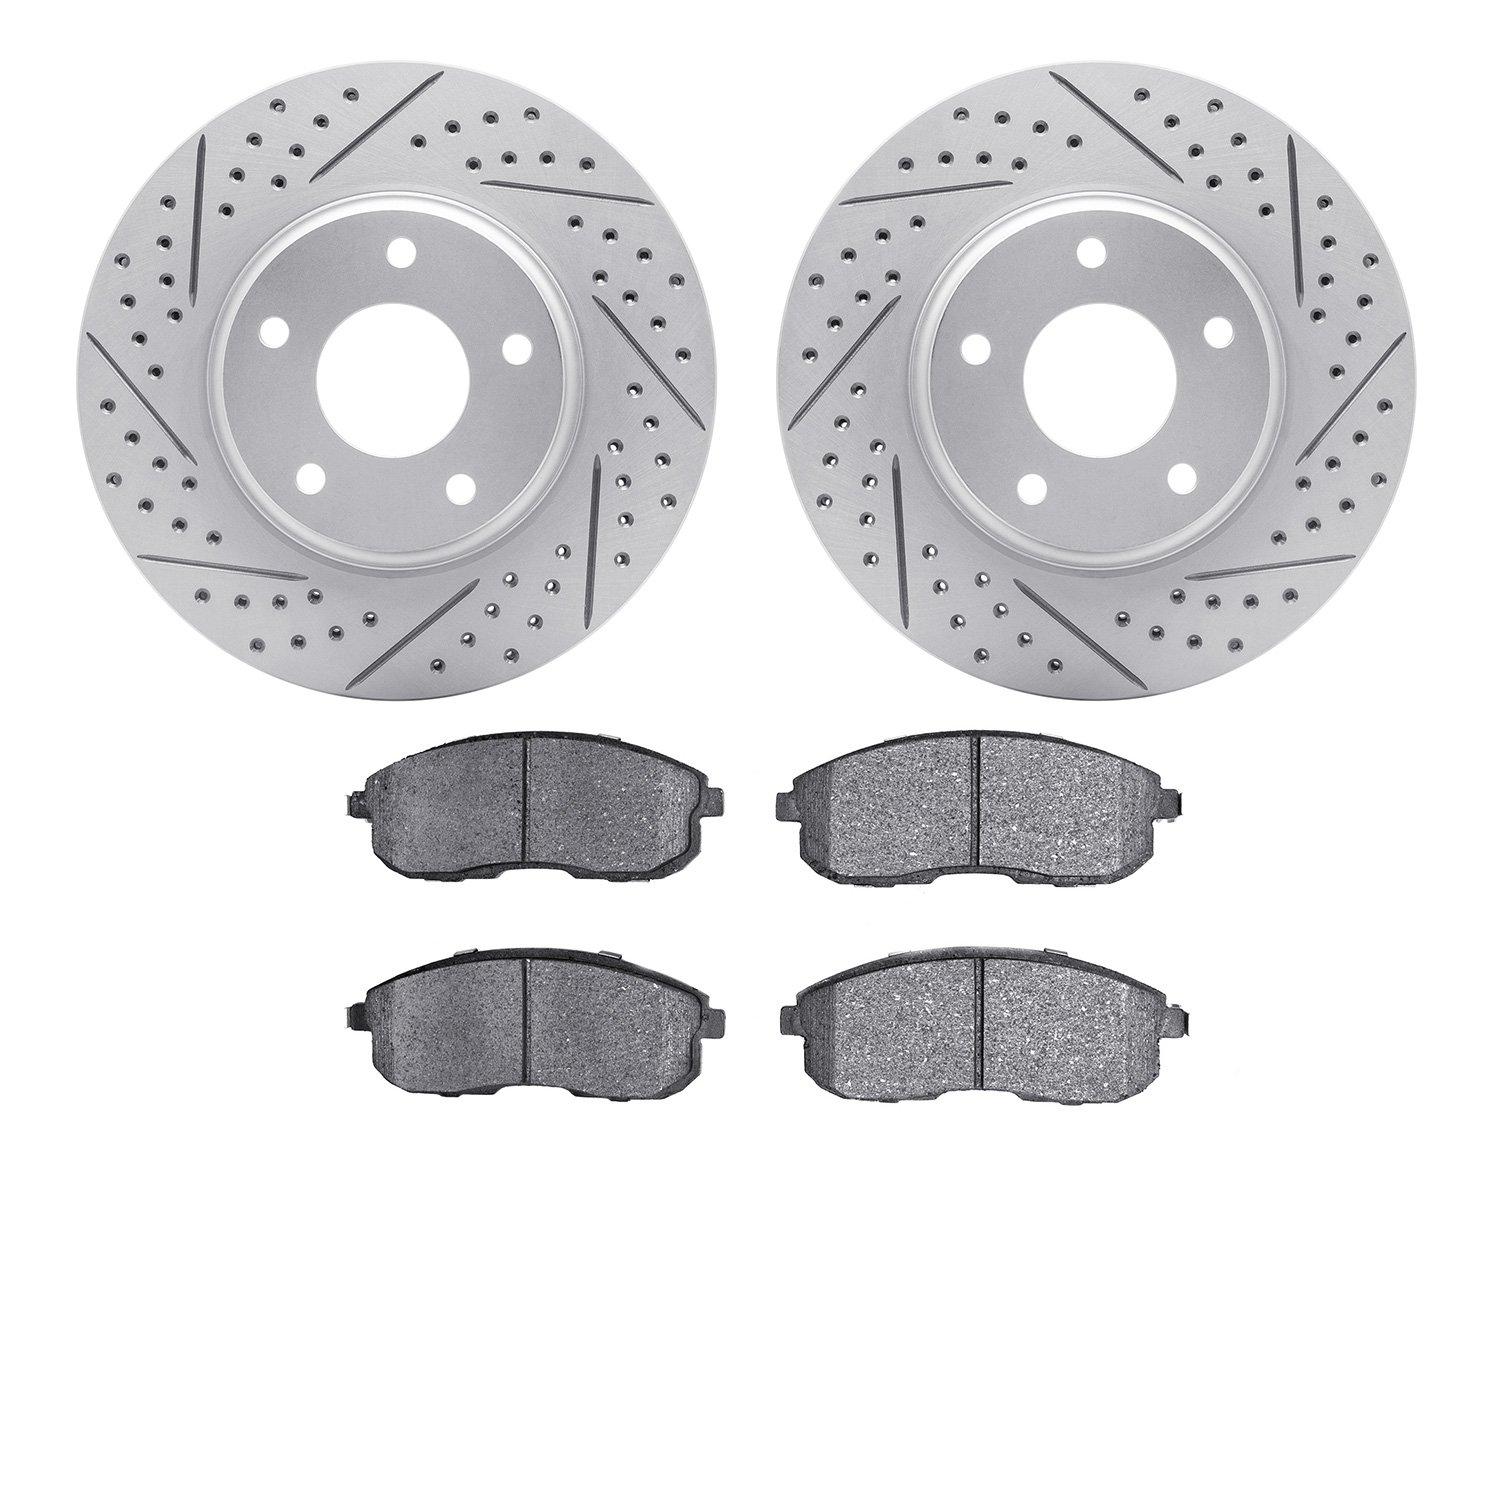 2502-67017 Geoperformance Drilled/Slotted Rotors w/5000 Advanced Brake Pads Kit, 2002-2006 Infiniti/Nissan, Position: Front